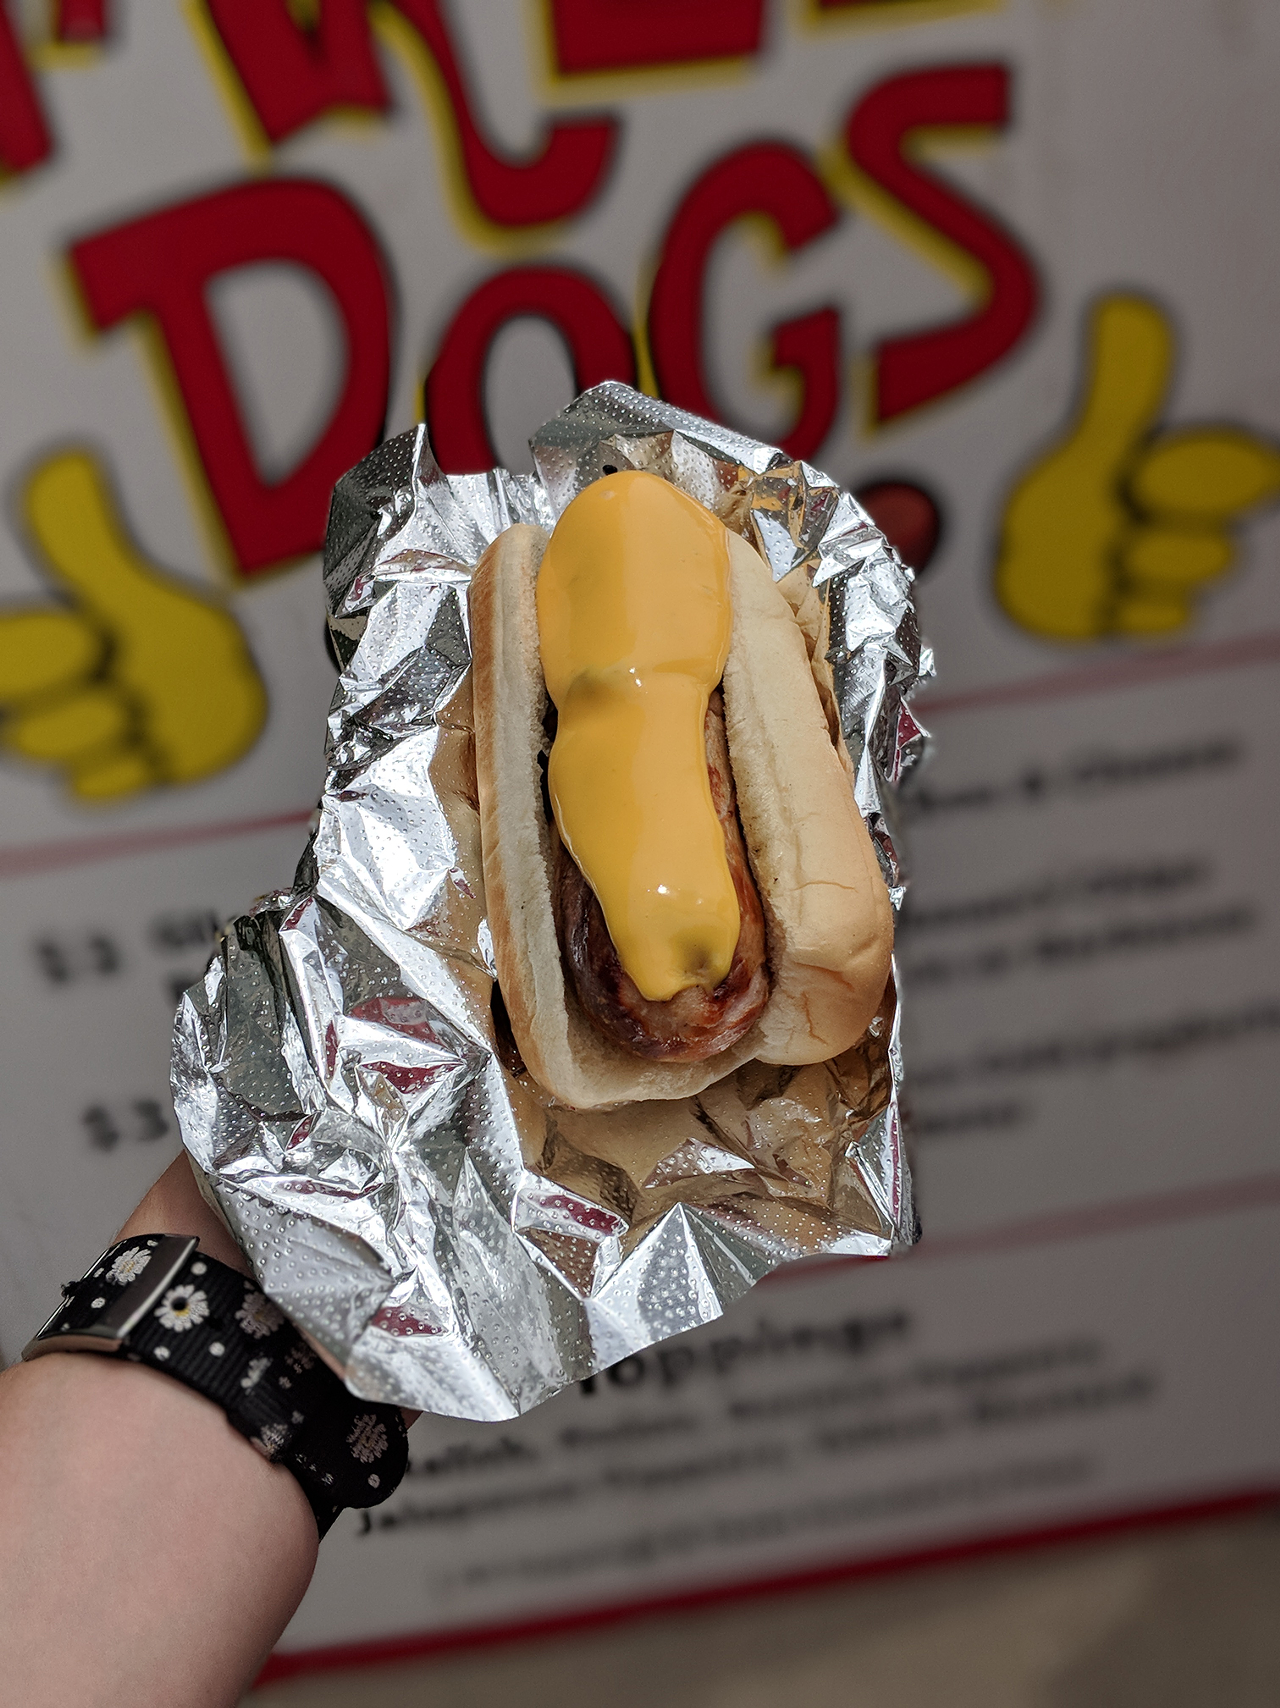 Harley Illes, owner of Harley Dogs, recommends the Glier's bratwurst smothered in nacho cheese.